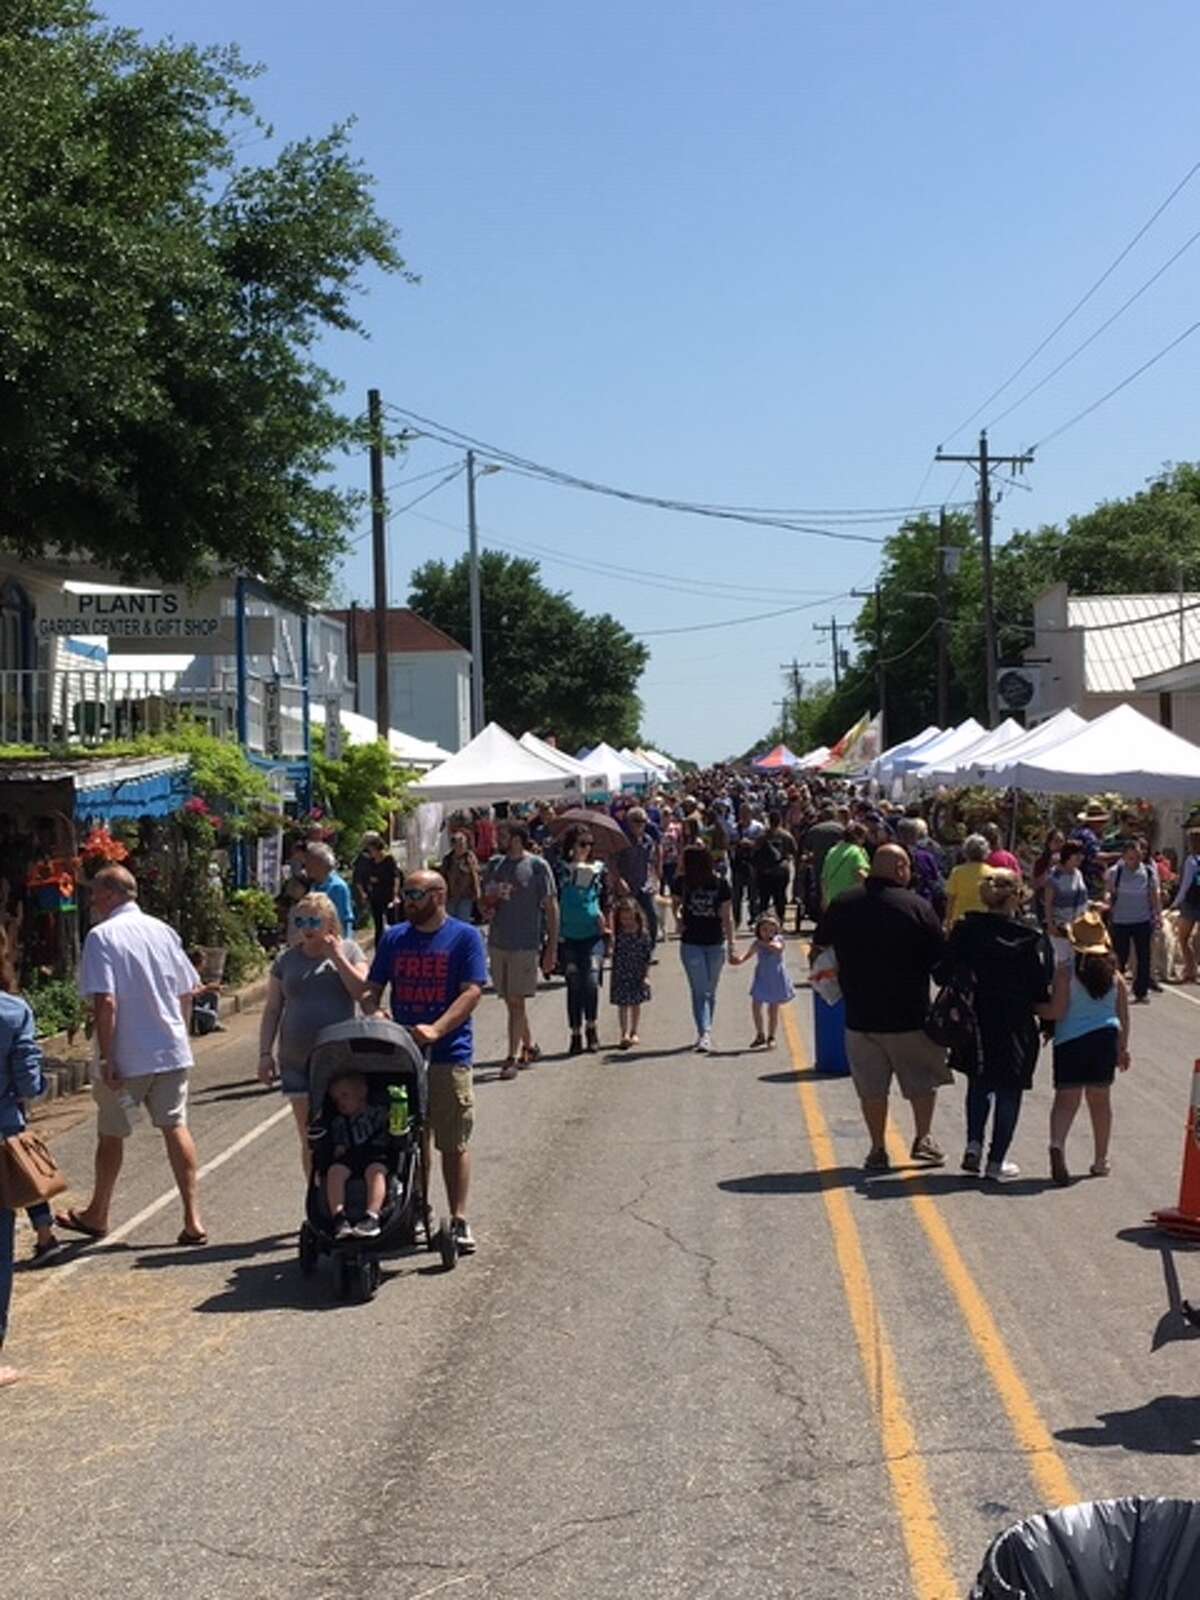 Check out the Official Bluebonnet Festival of Texas The annual event transforms the "little town on the hill" into a massive street festival with more than 250 vendors offering an eclectic mix of jewelry, clothing, artworks, food items and more. This year's festival runs April 18-20 in historic downtown Chappell Hill.